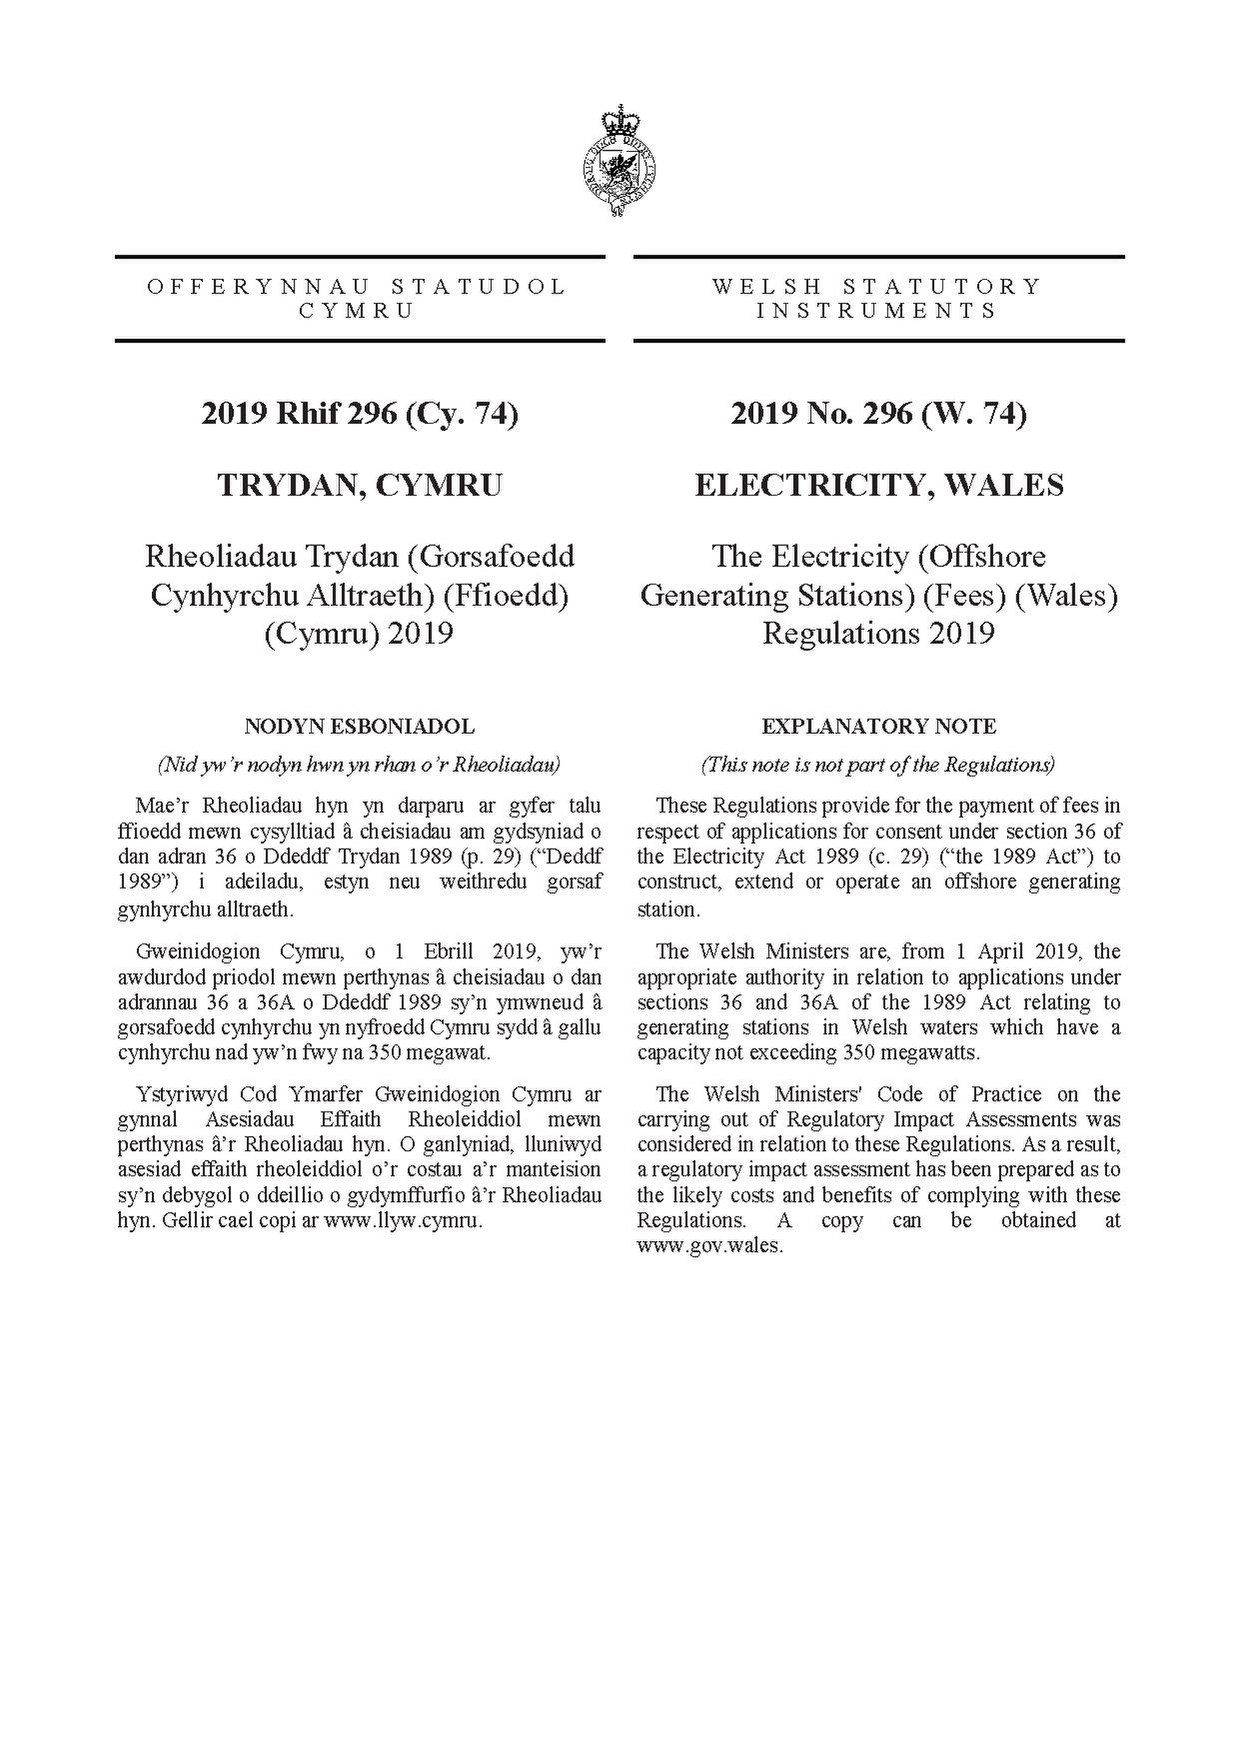 File The Electricity Offshore Generating Stations Fees Wales Regulations 19 Wsi 19 296 Qp Pdf Wikimedia Commons